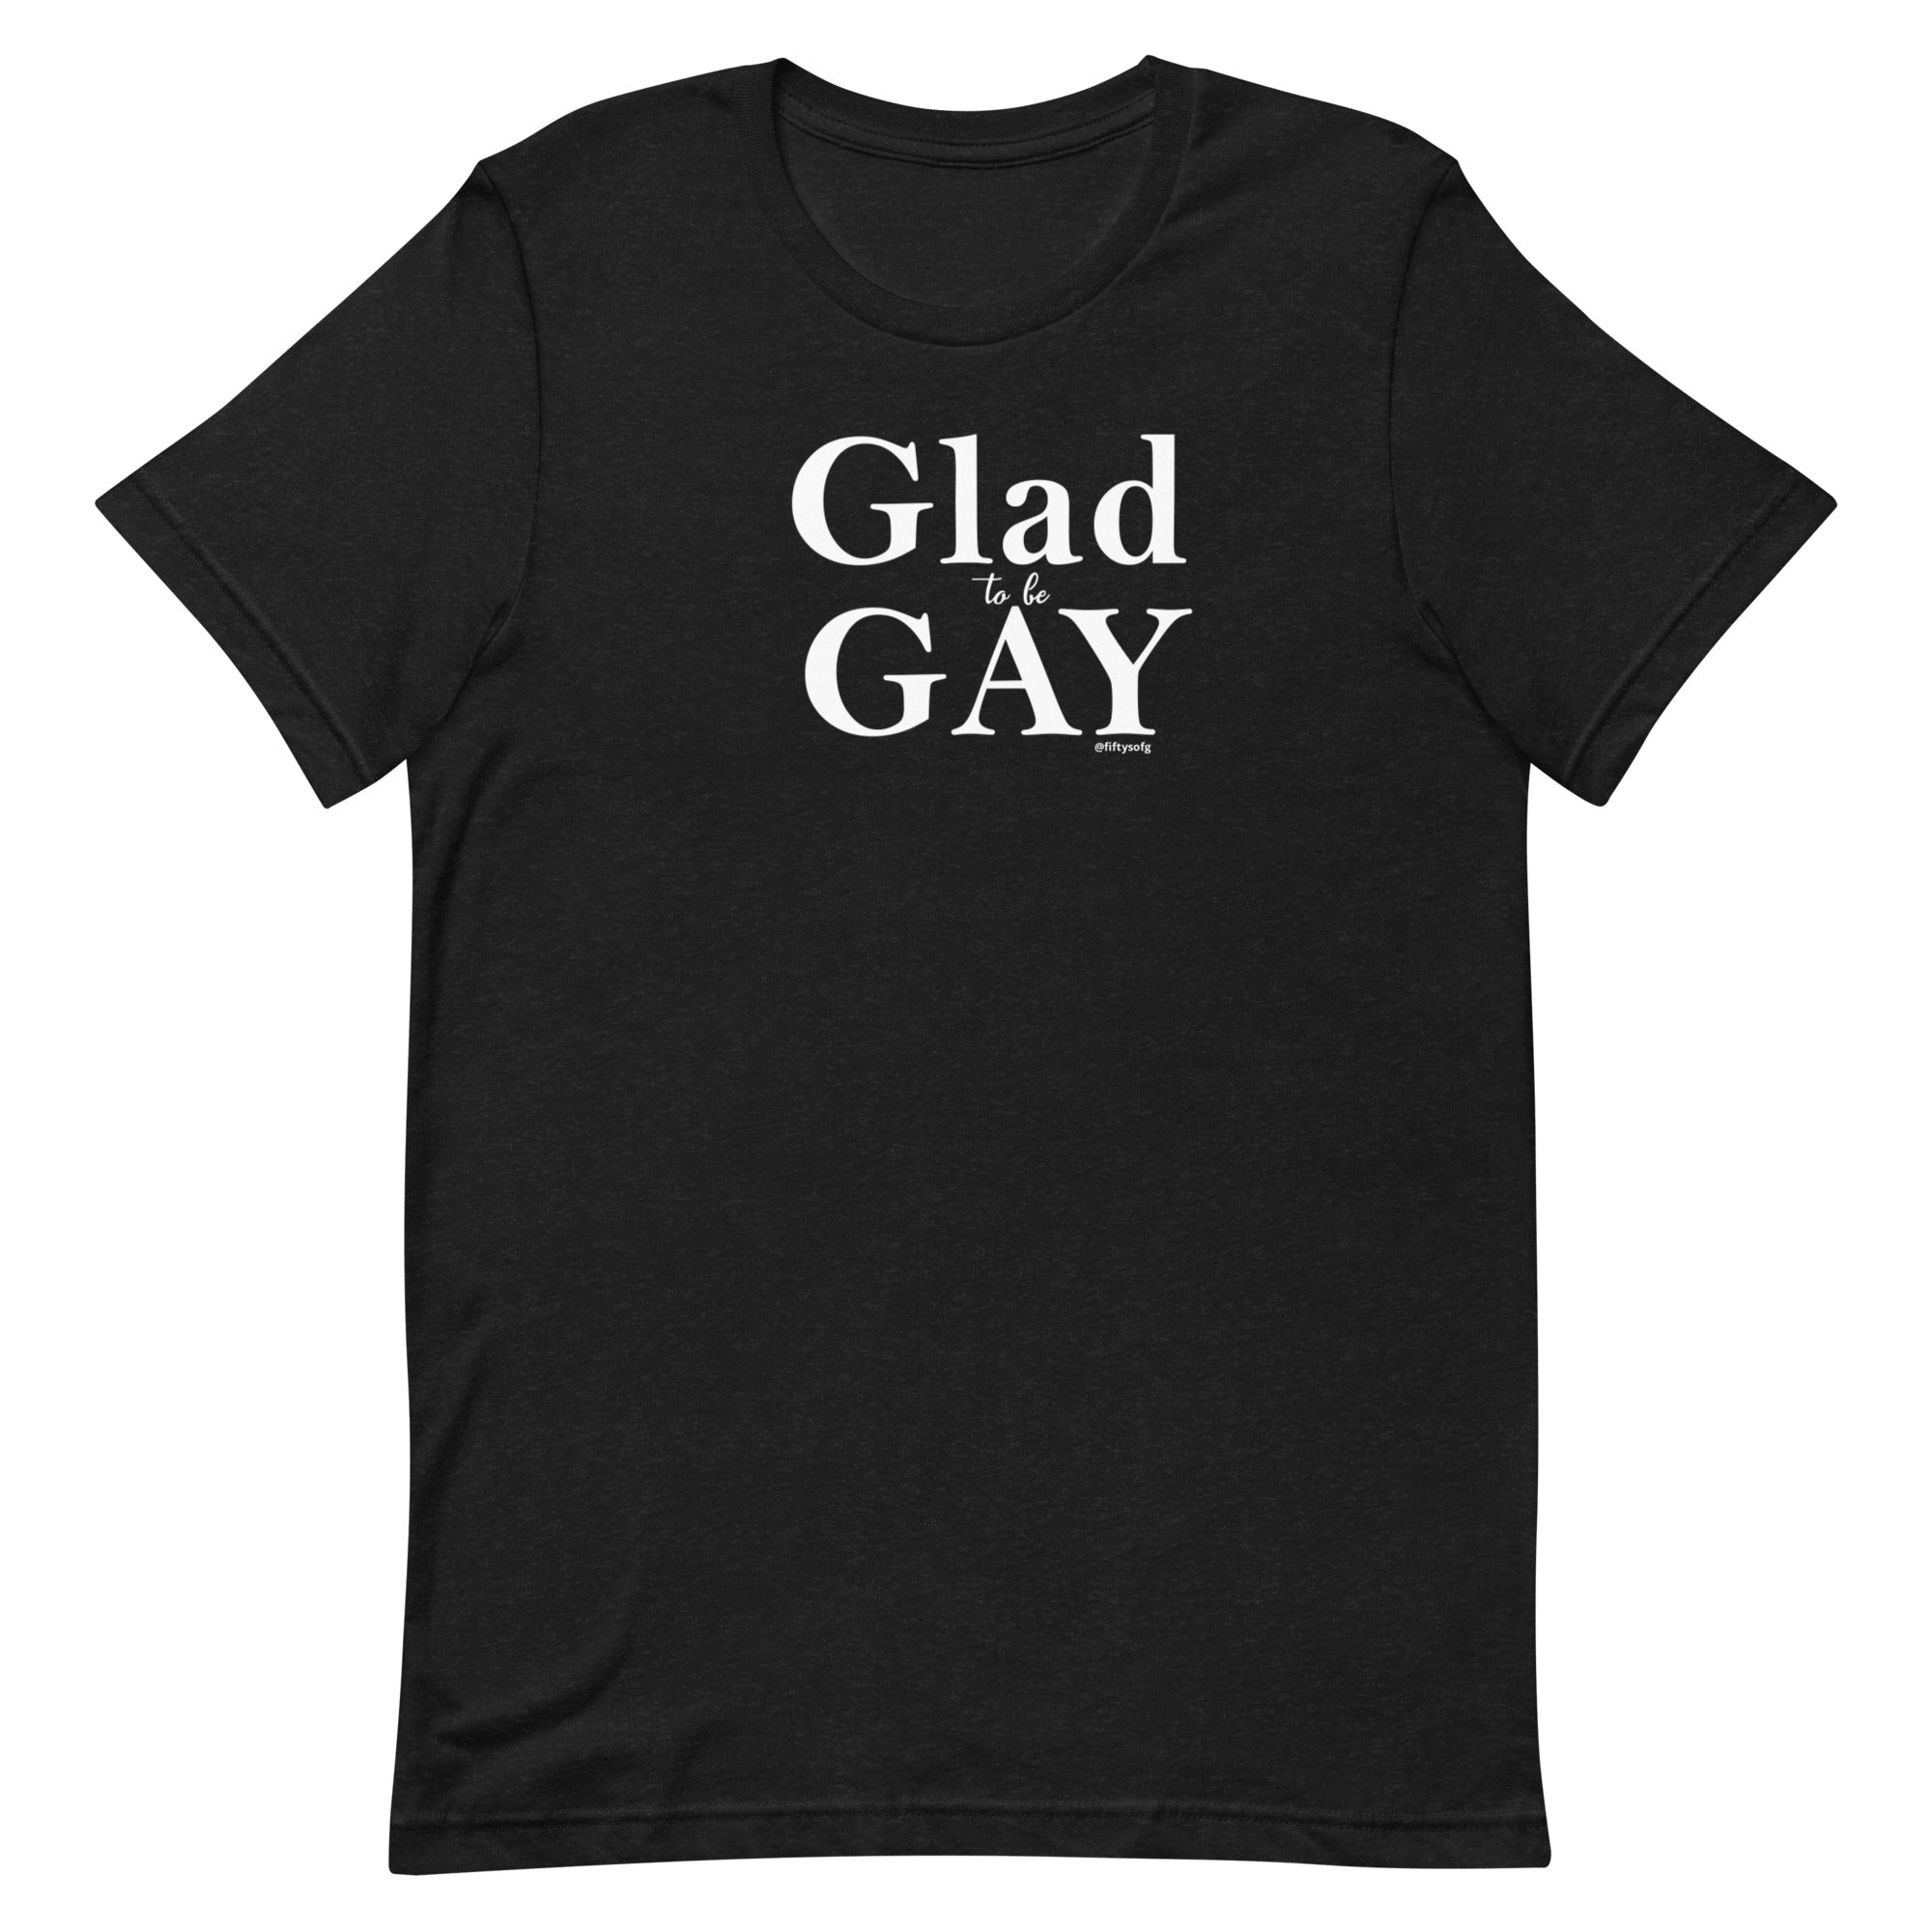 Glad to be Gay - Beautiful Unisex t-shirt